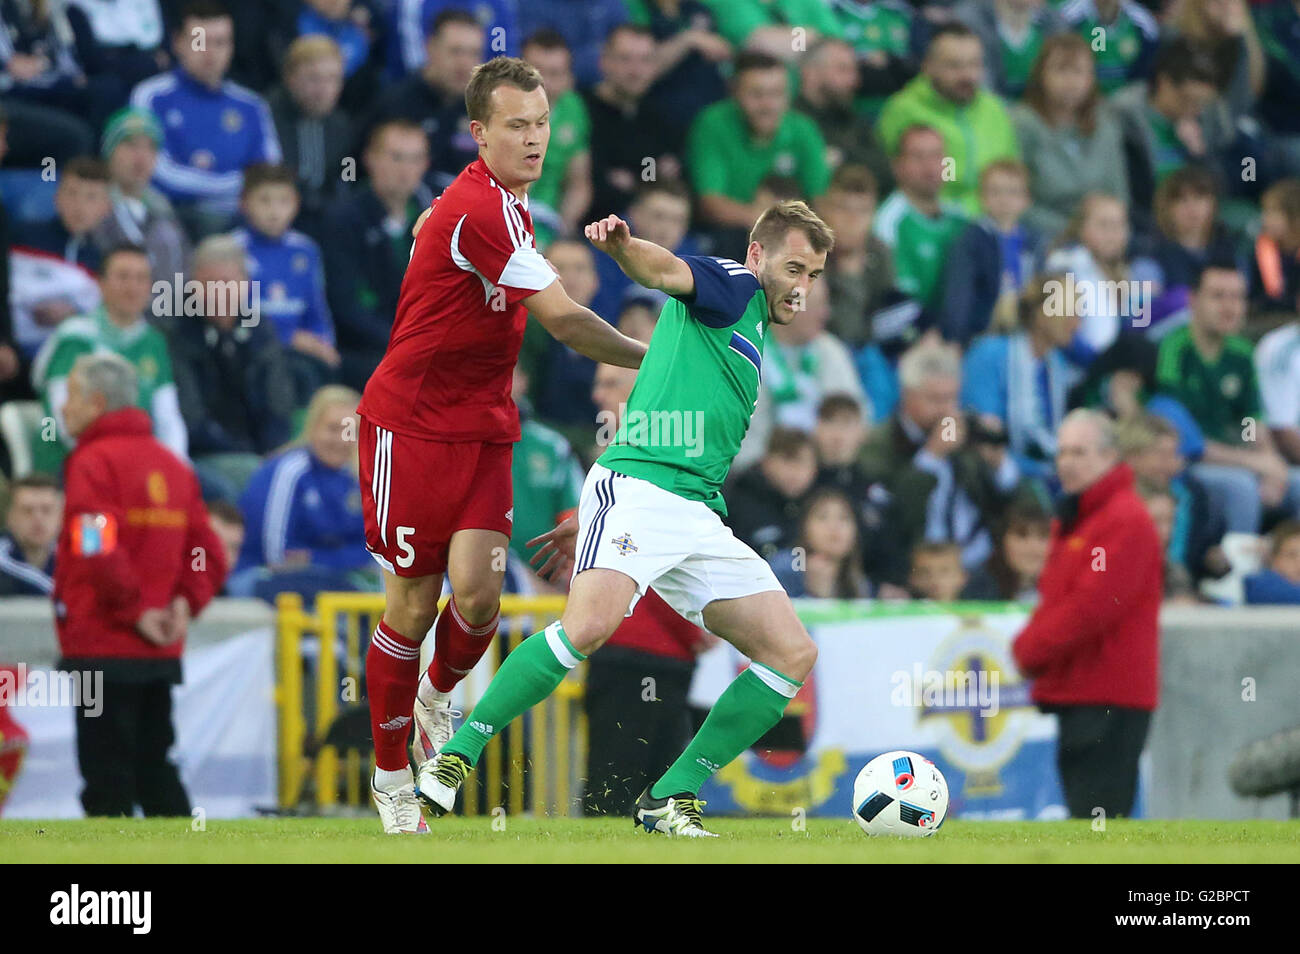 Northern Ireland's Niall McGinn (right) and Belarus' Denis Polyakov battle for the ball during the International Friendly at Windsor Park, Belfast. Stock Photo